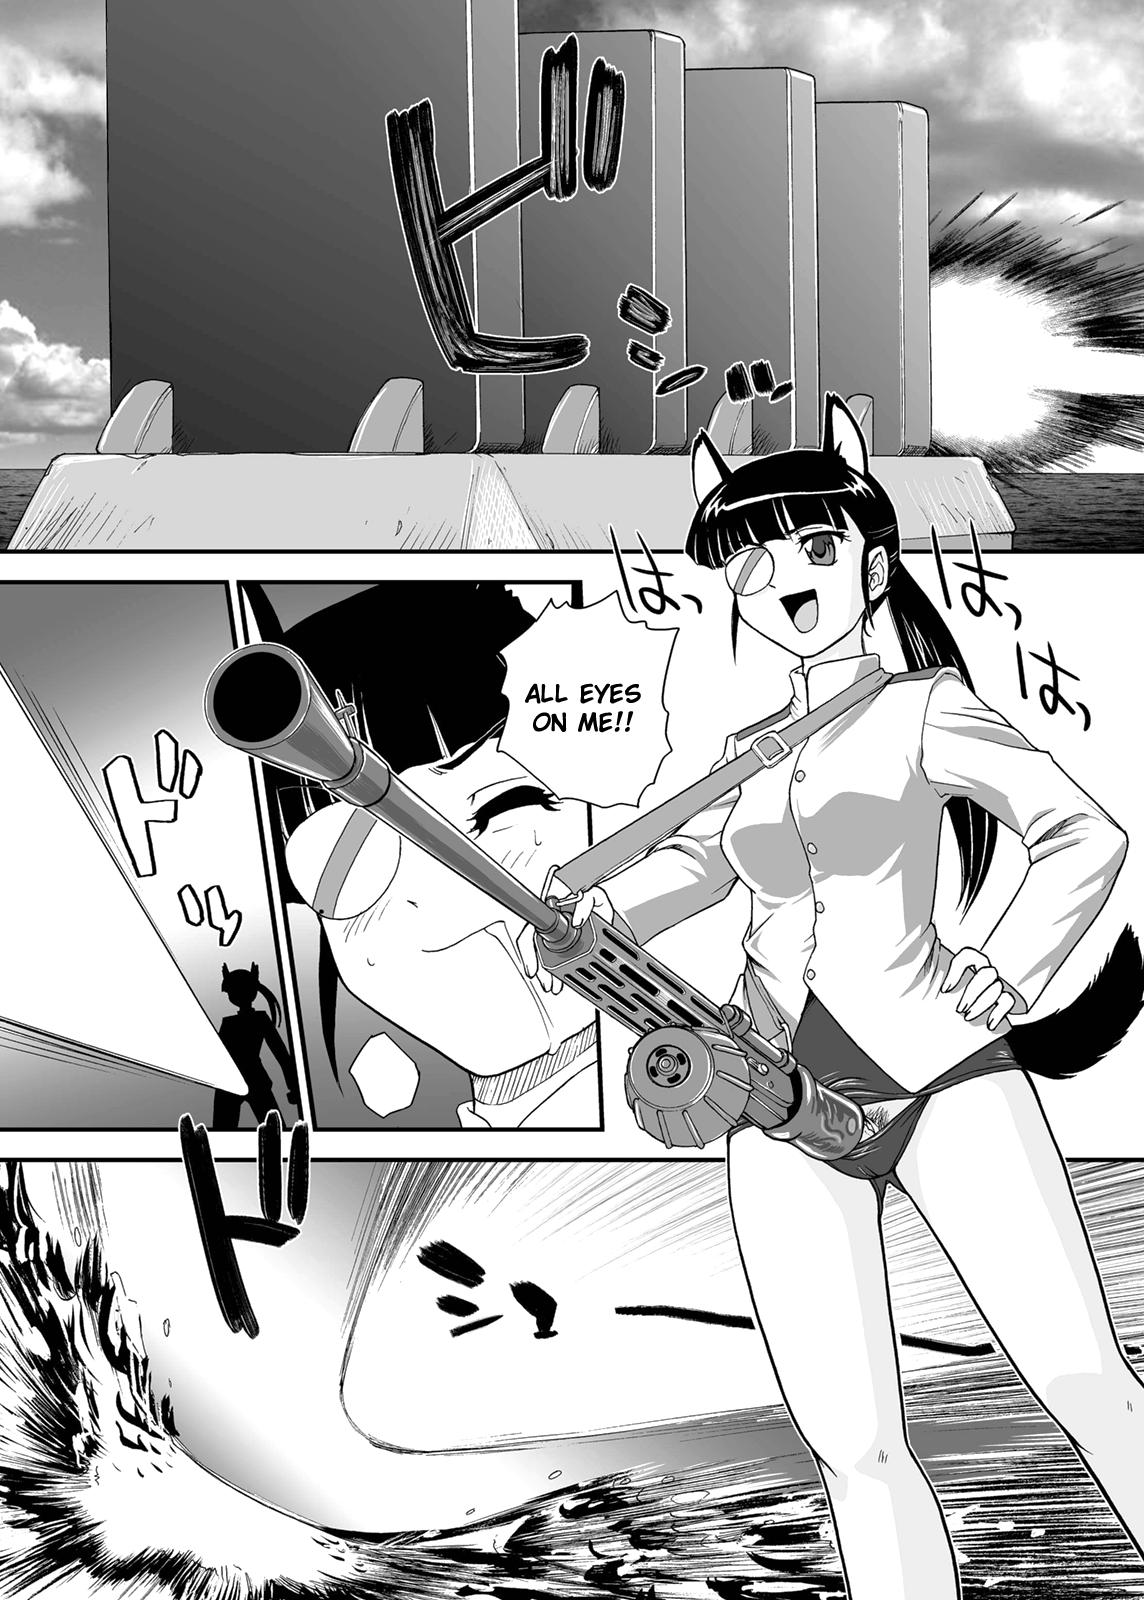 Groupsex Chin ★ ja Naikara Hazukashiku Naimon!!! | It's Not A Real Dick, So There's Nothing to Be Embarrassed About!!! - Strike witches Lez - Page 5